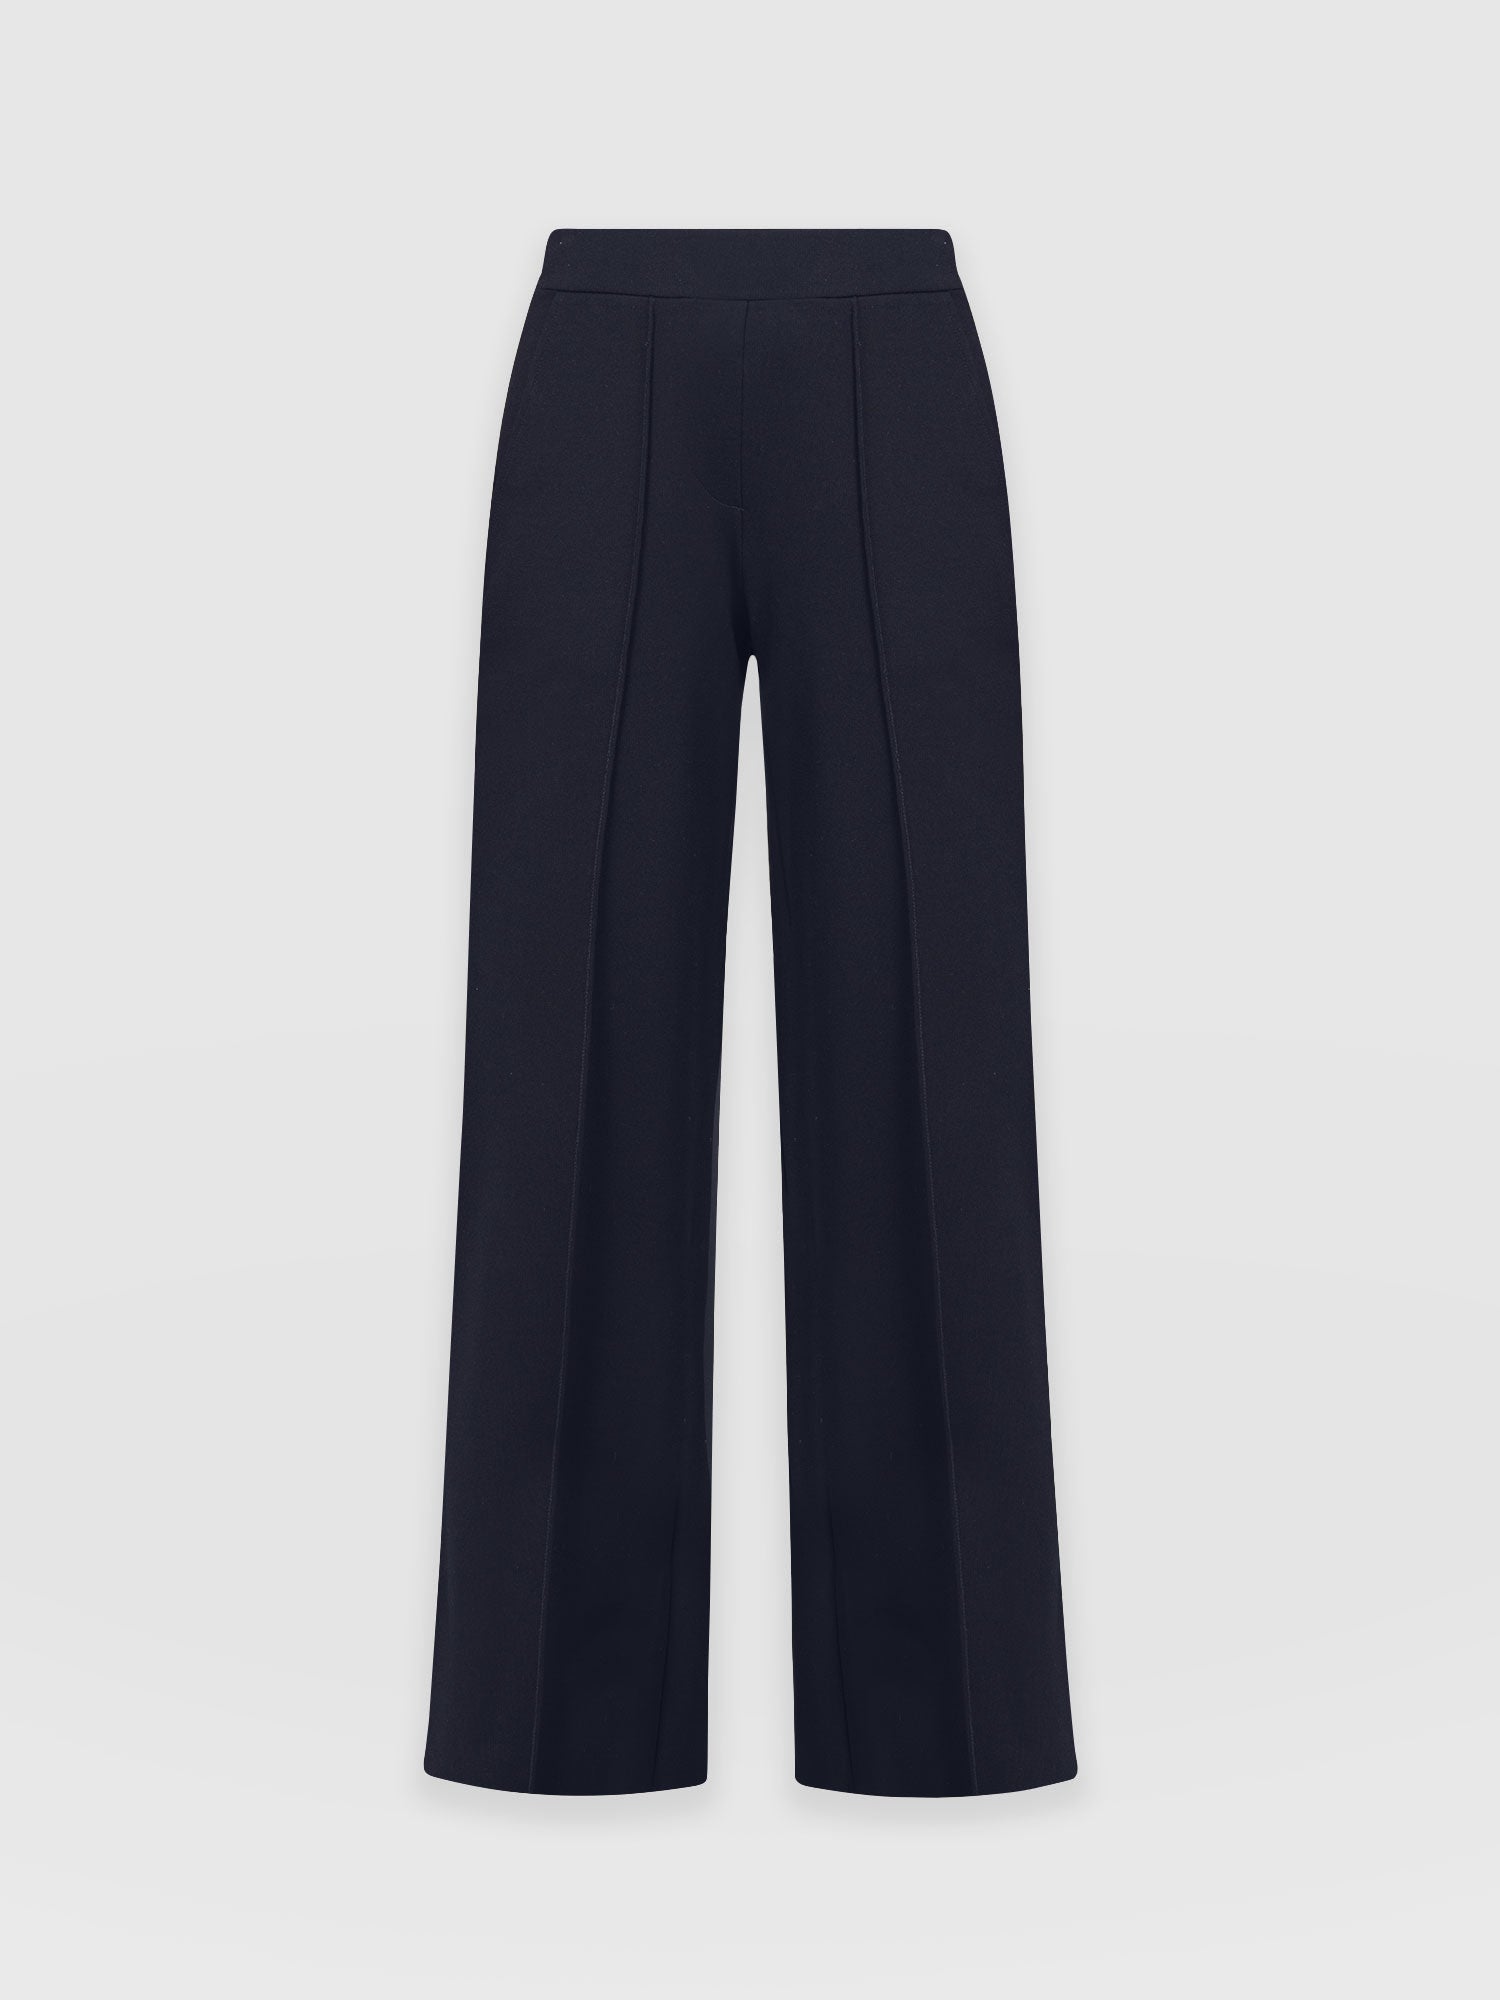 Buy Navy Trousers & Pants for Women by FITHUB Online | Ajio.com